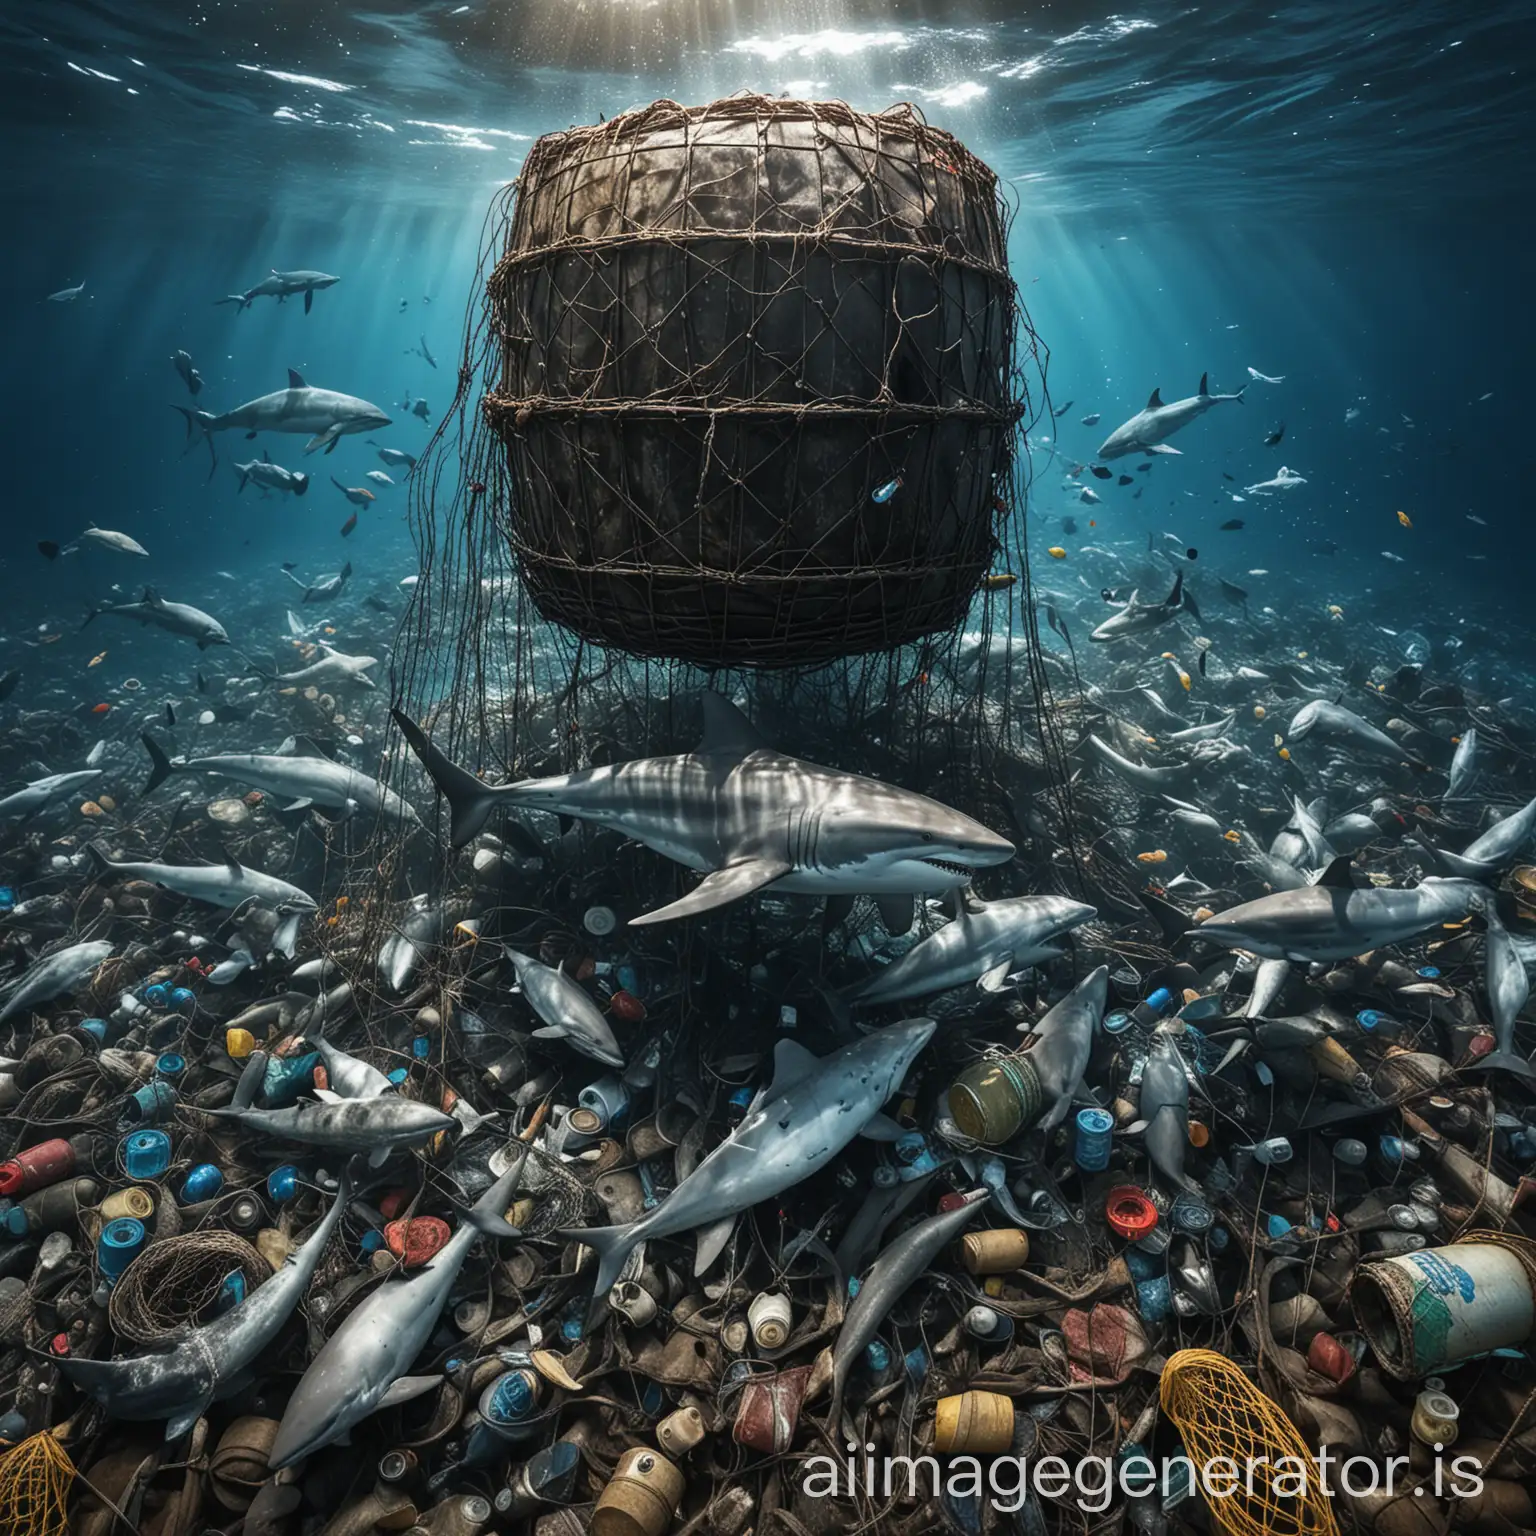 Underwater-Scene-with-Oil-Barrel-Shark-Dolphins-and-Plastic-Waste